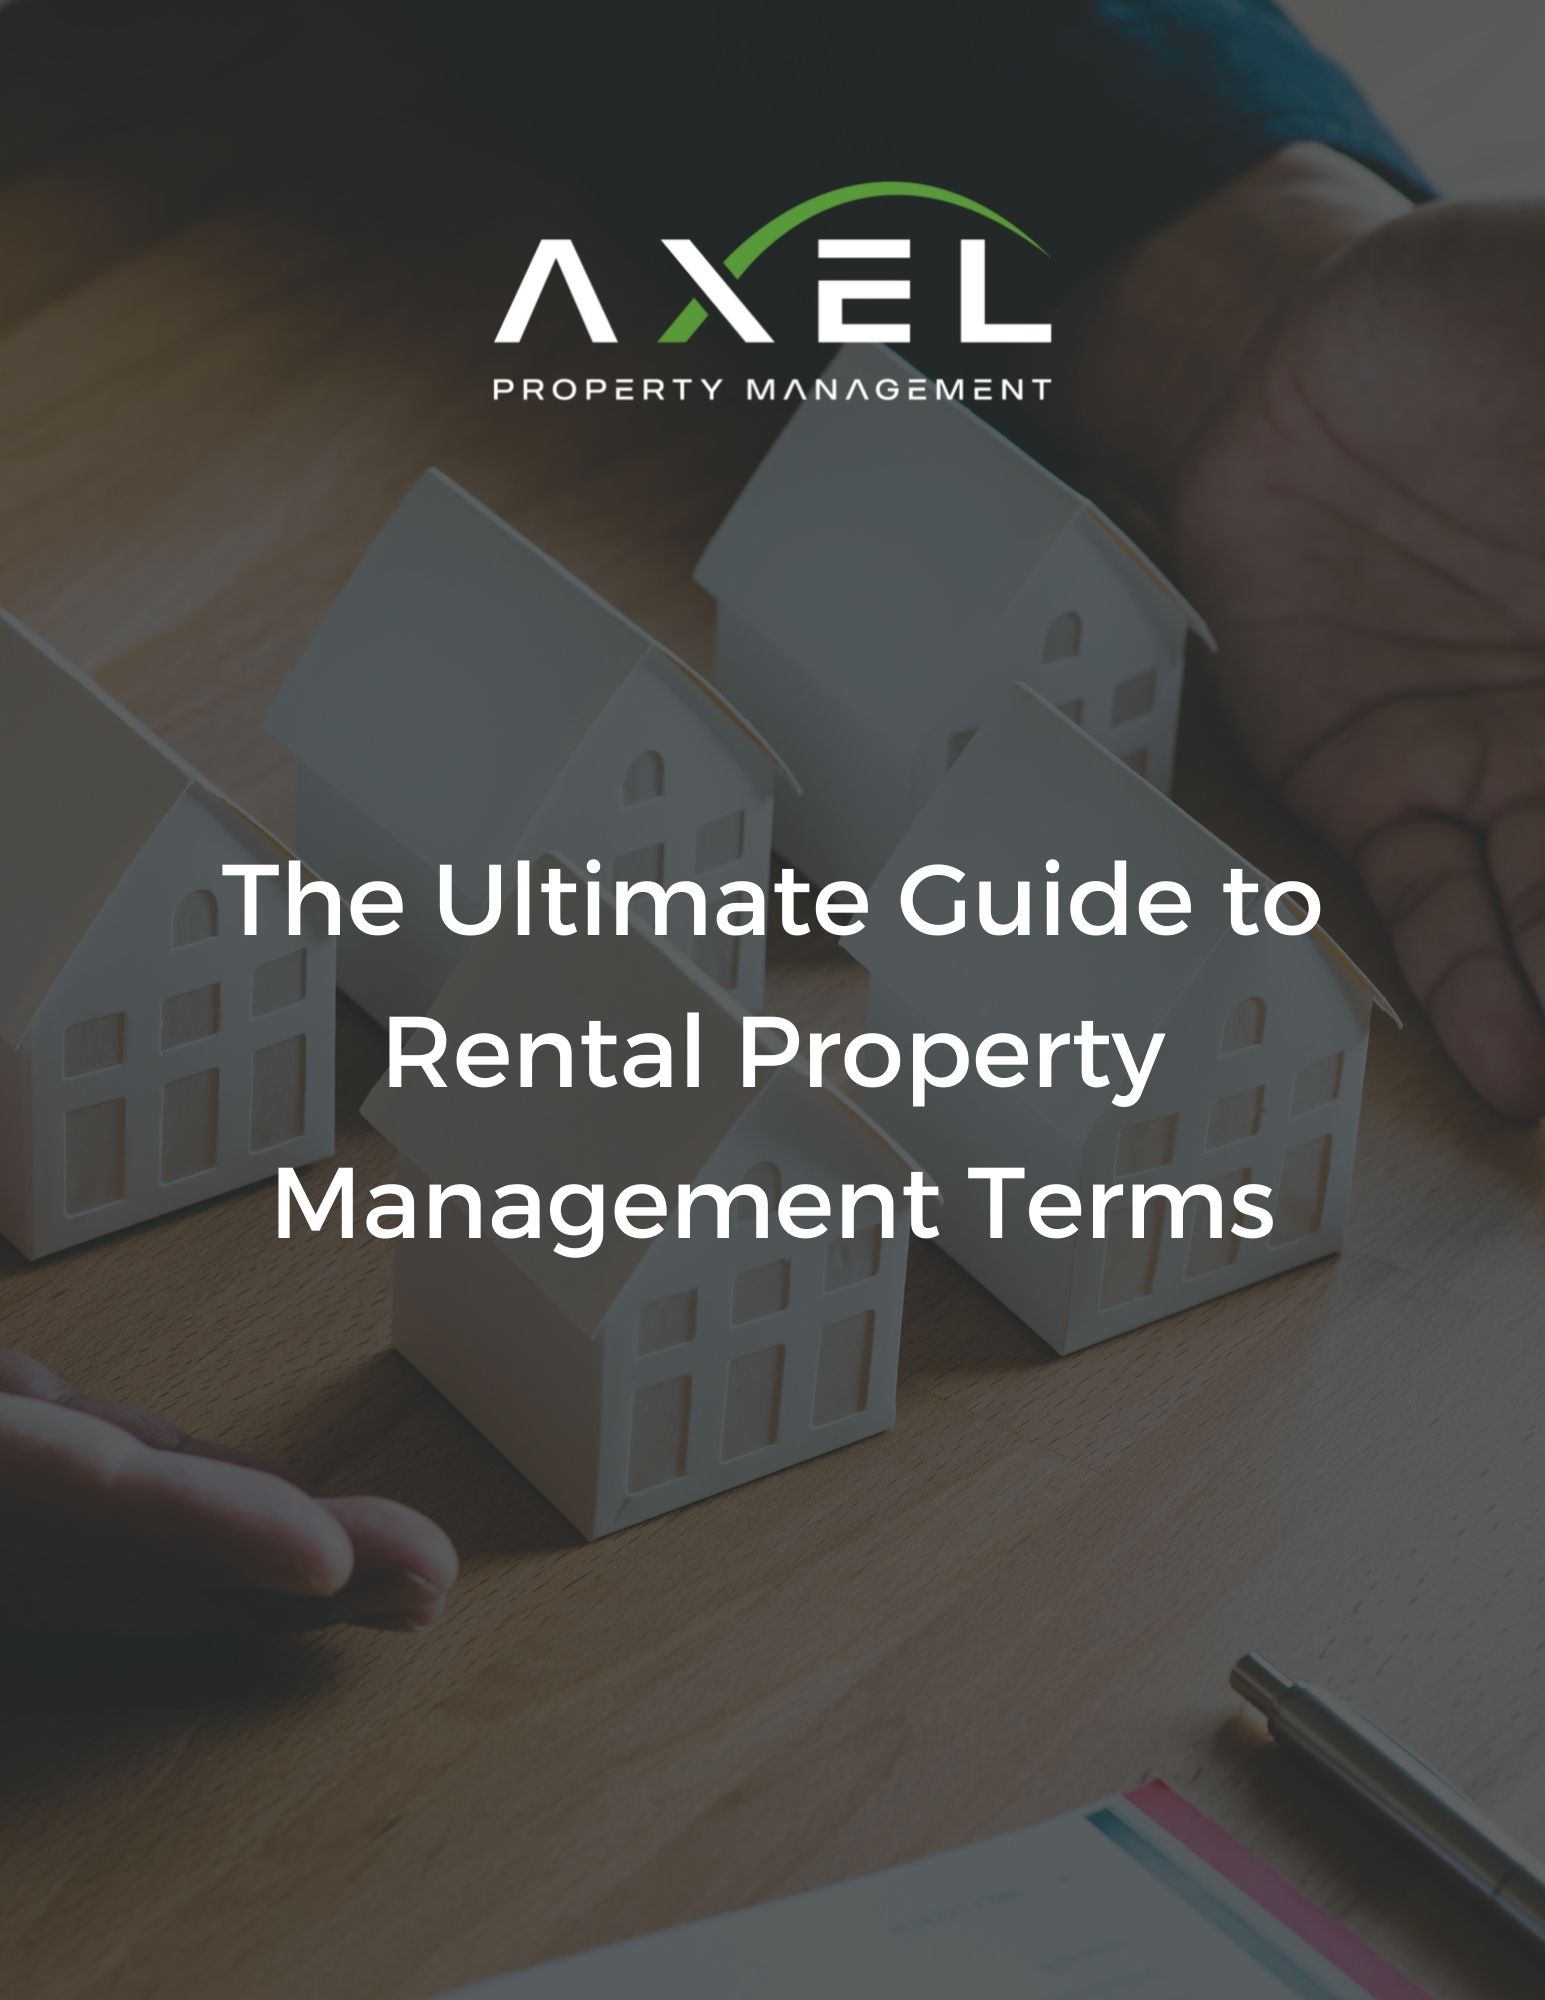 The Ultimate Guide to Rental Property Management Terms